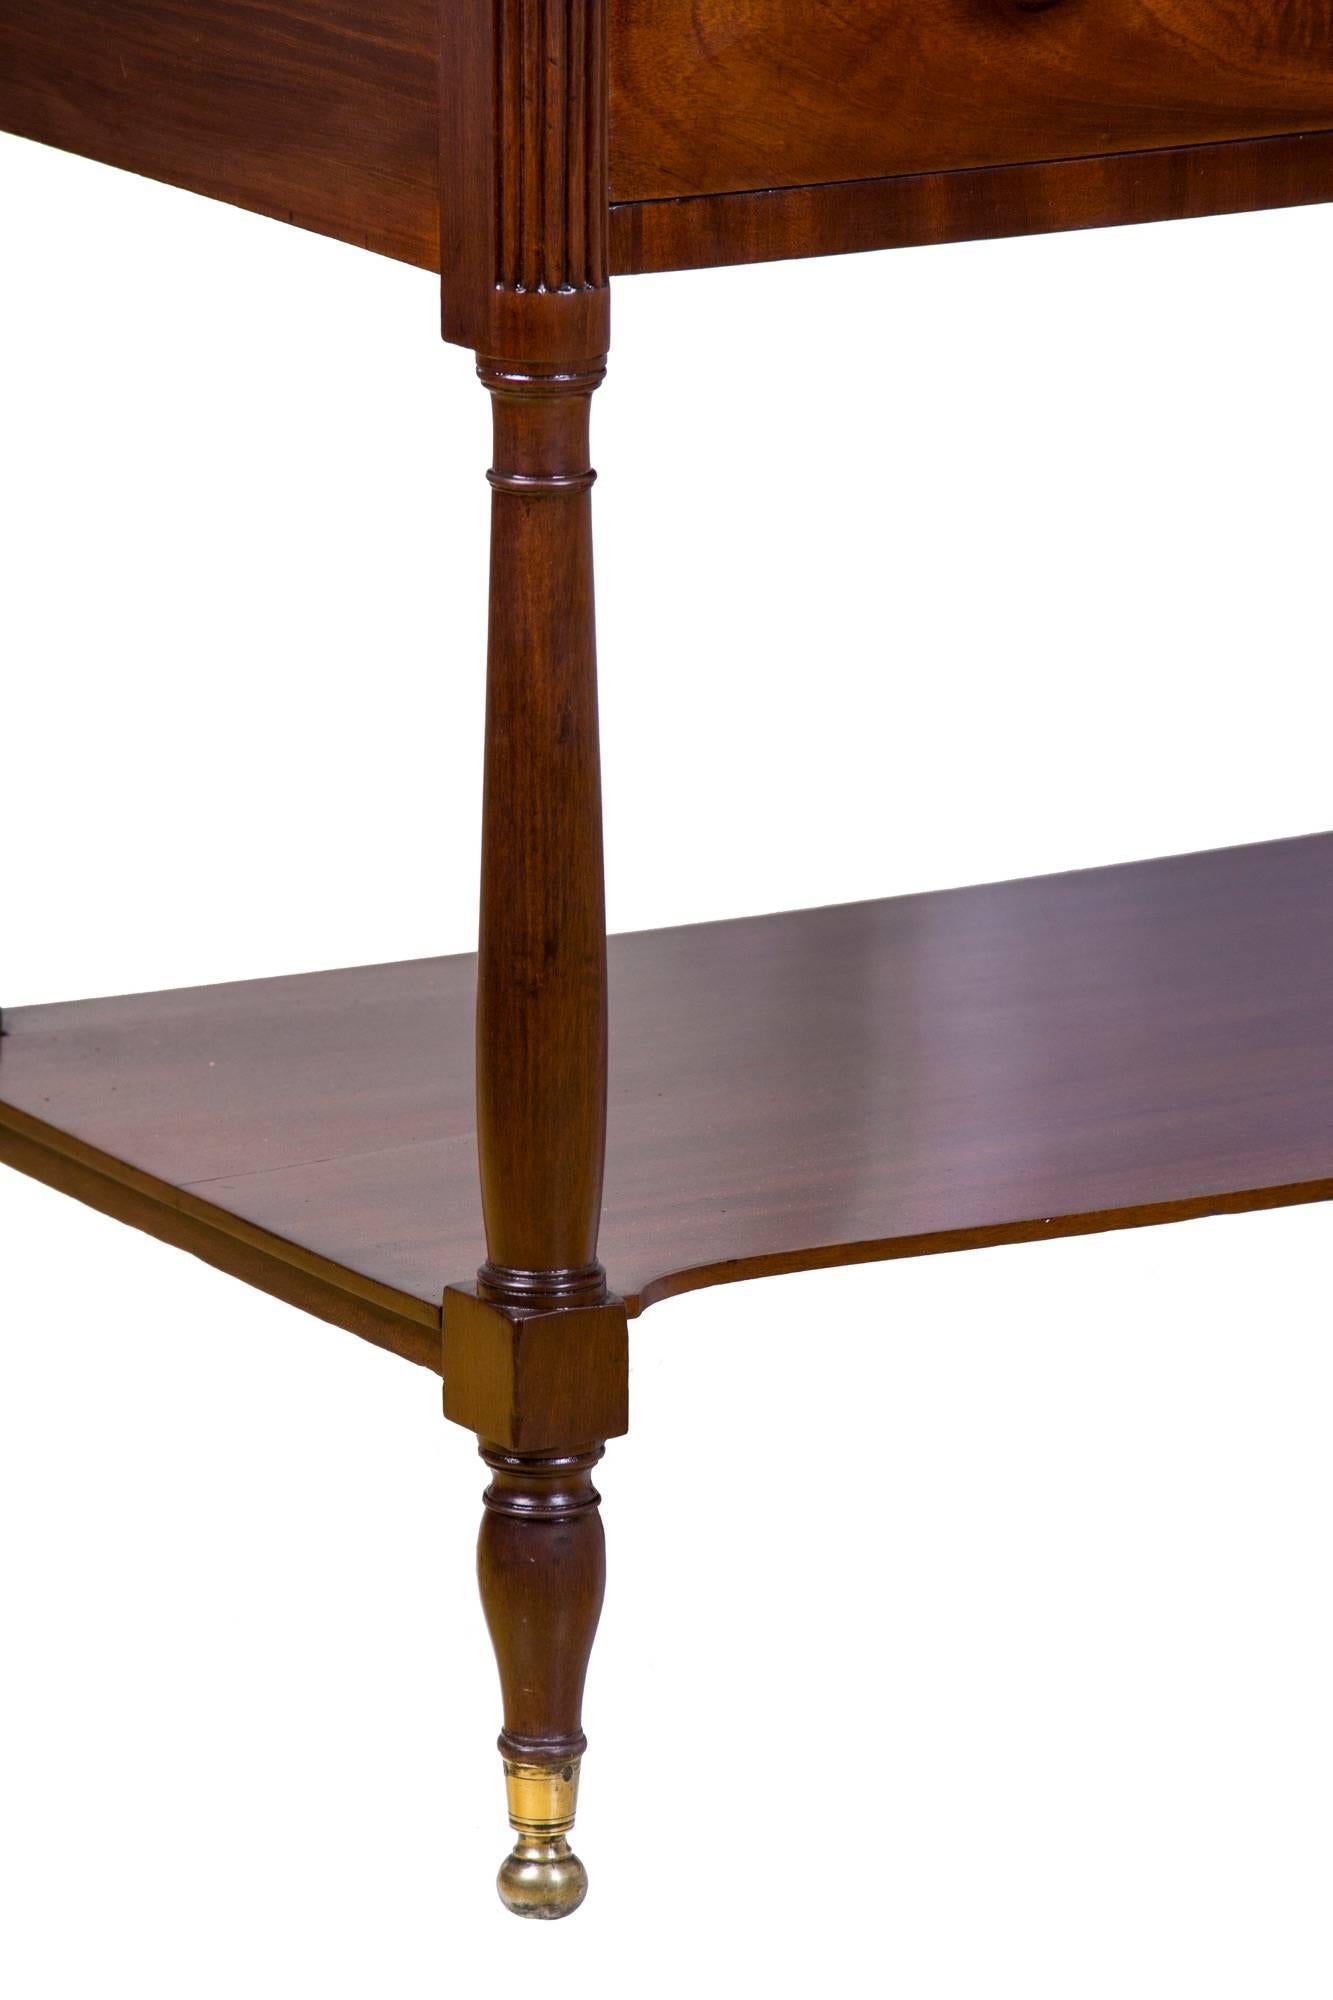 This is a quintessential New York Classical server of the Phyfe school. The top is composed of solid striped mahogany and the mahogany throughout is vibrant with its historic surface under a finely French polished finished. There are no repairs,